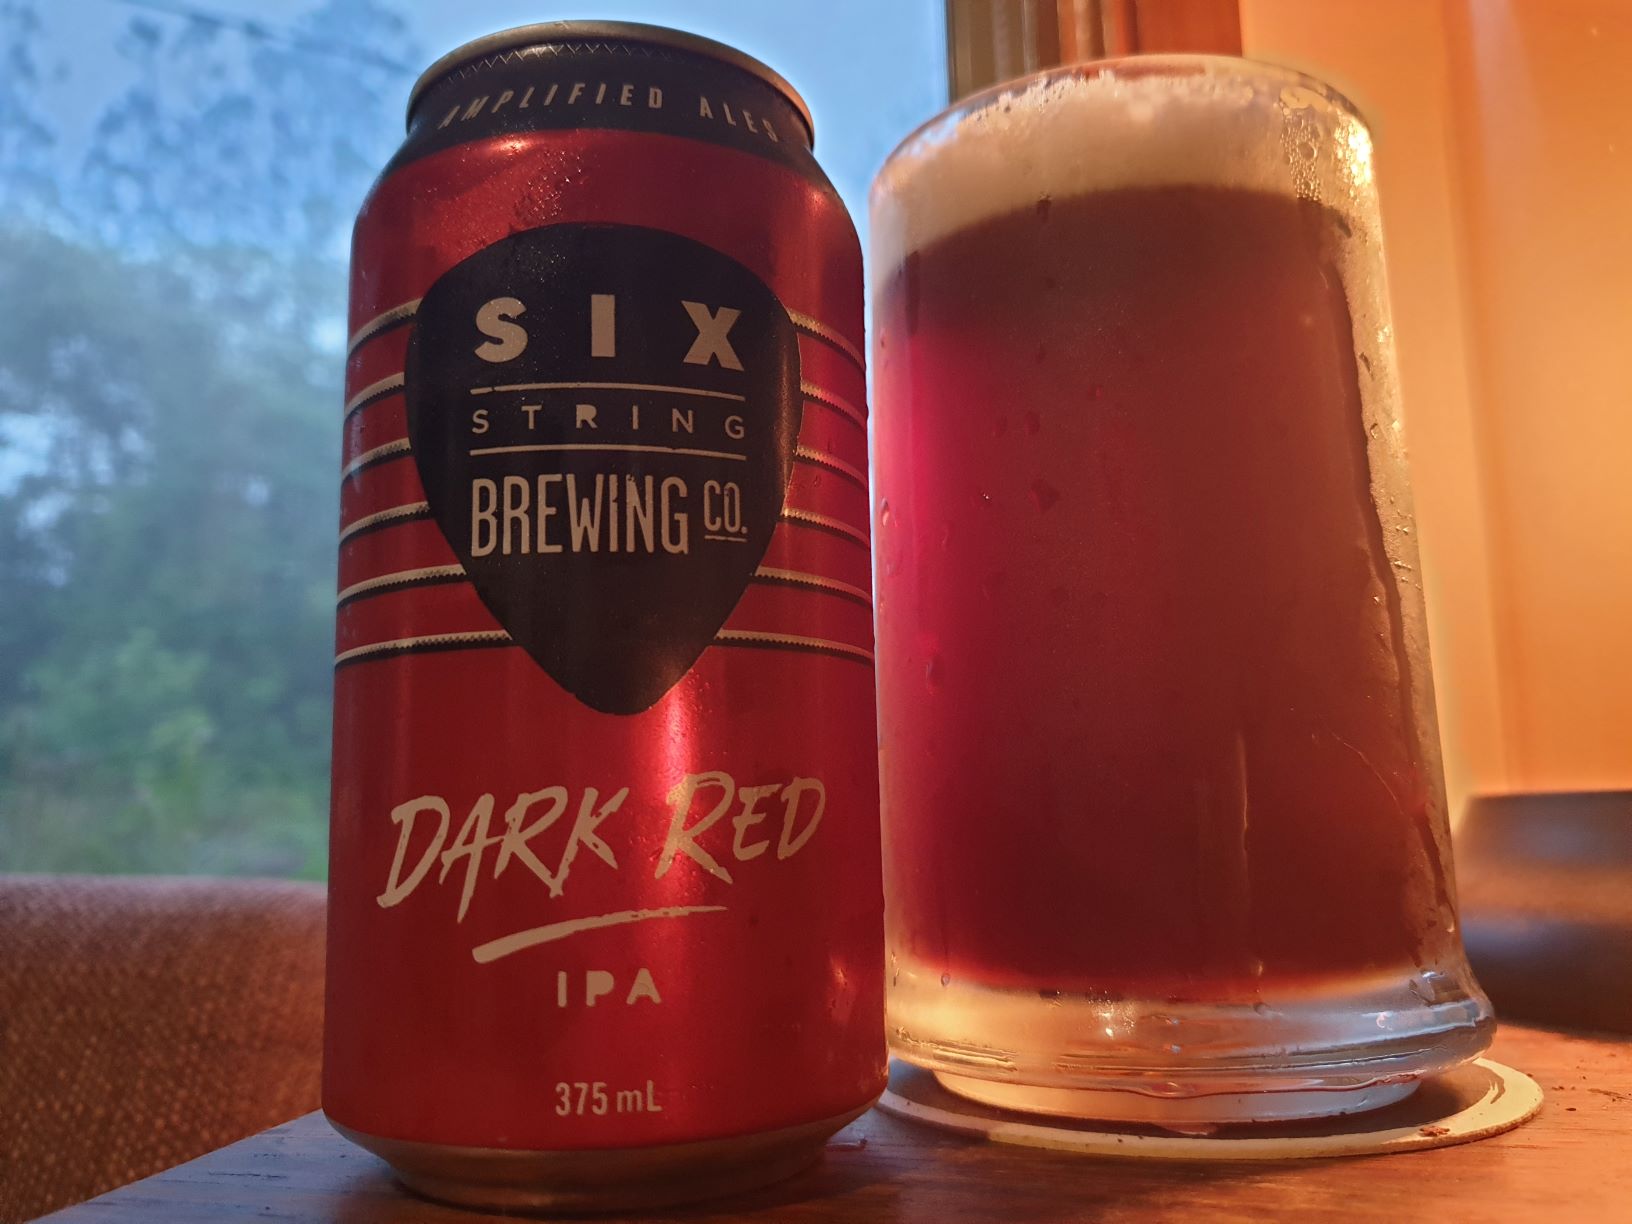 Dark Red IPA by Six String Brewing Co